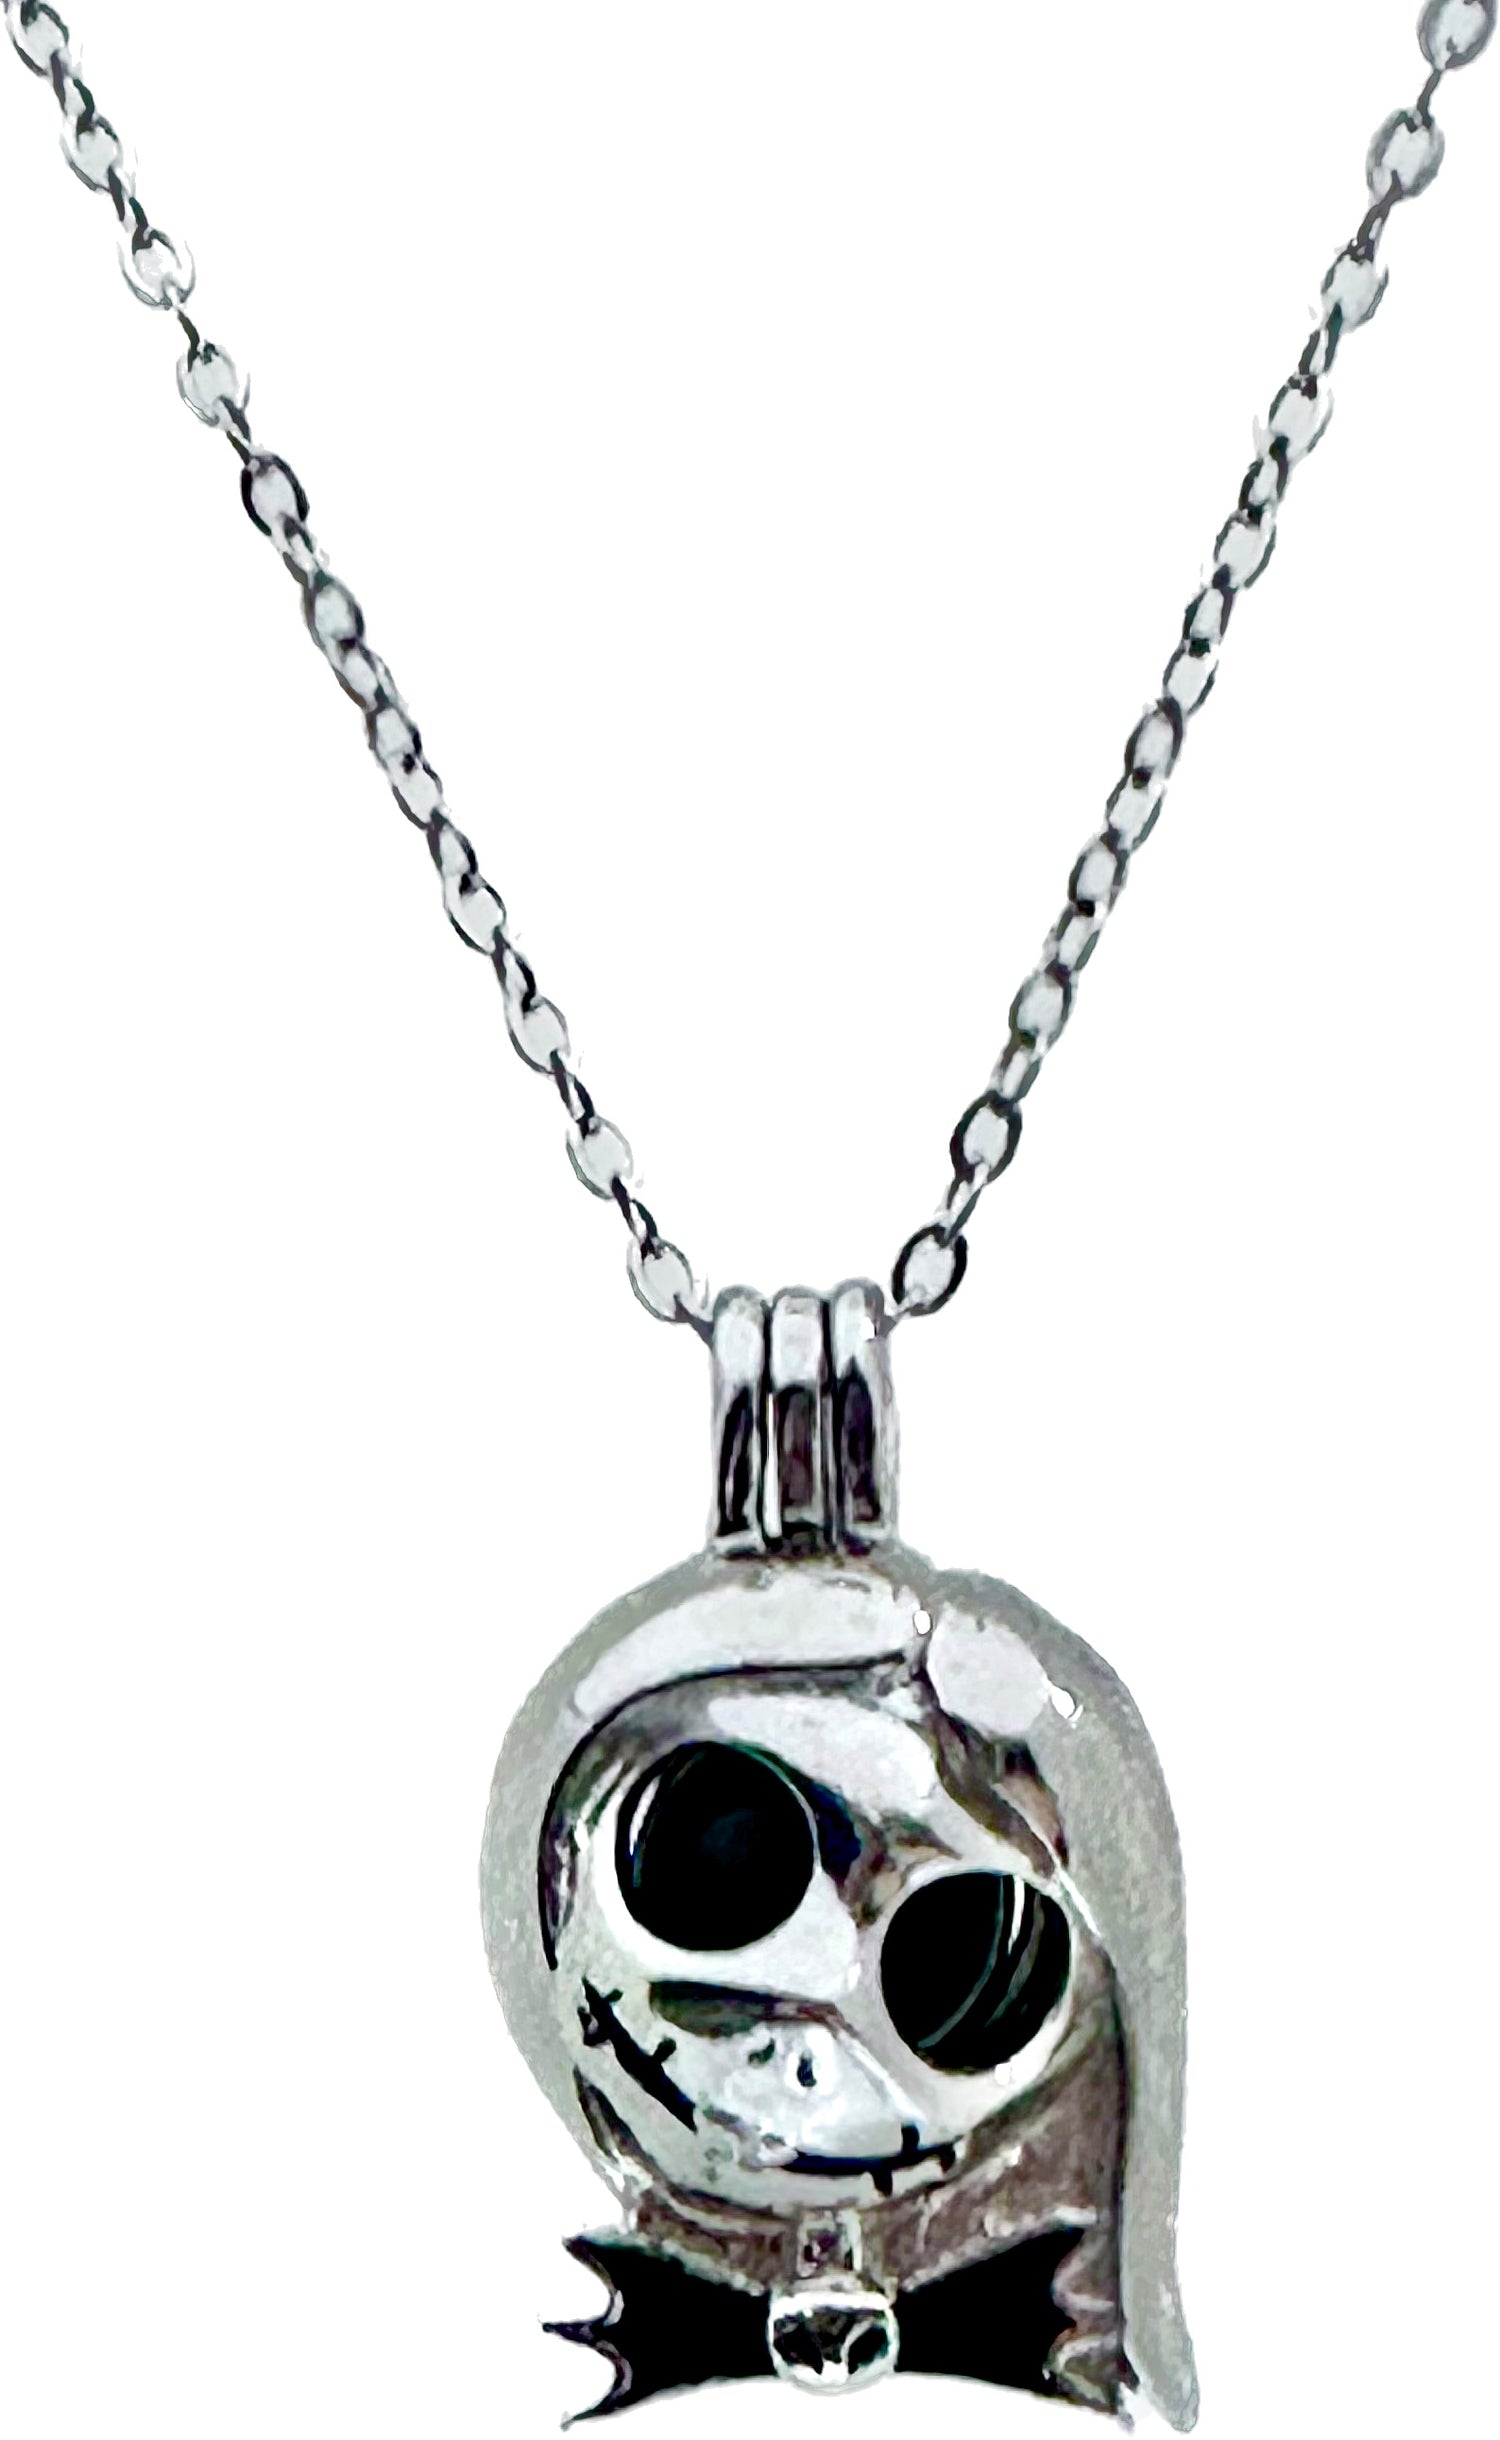 Cage Pendant .925 Sterling Silver Girl Rag Doll Halloween